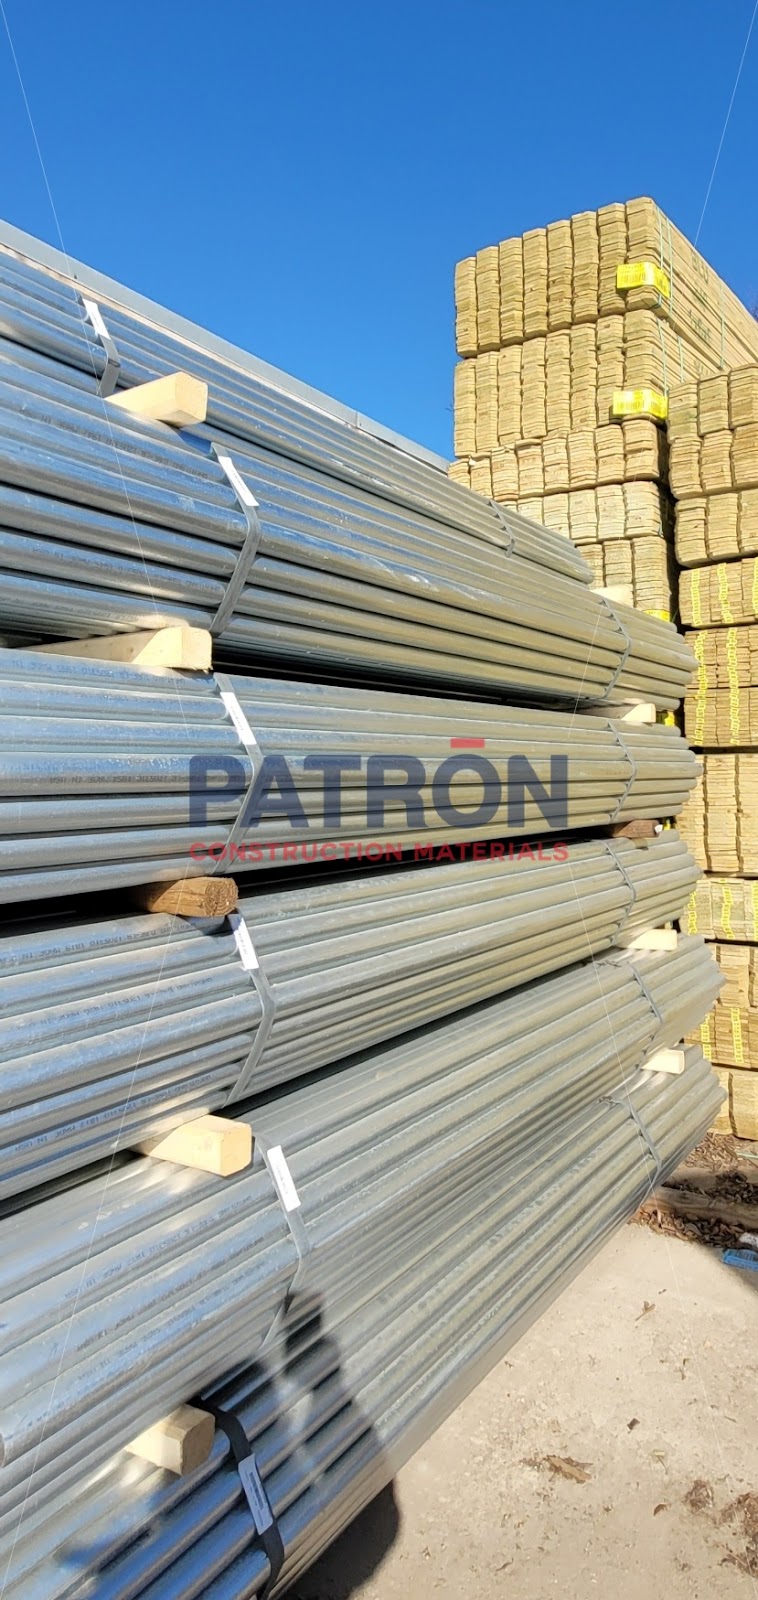 Patron Construction Materials | 2866 Fort Worth Ave, Dallas, TX 75211, USA | Phone: (214) 347-6869